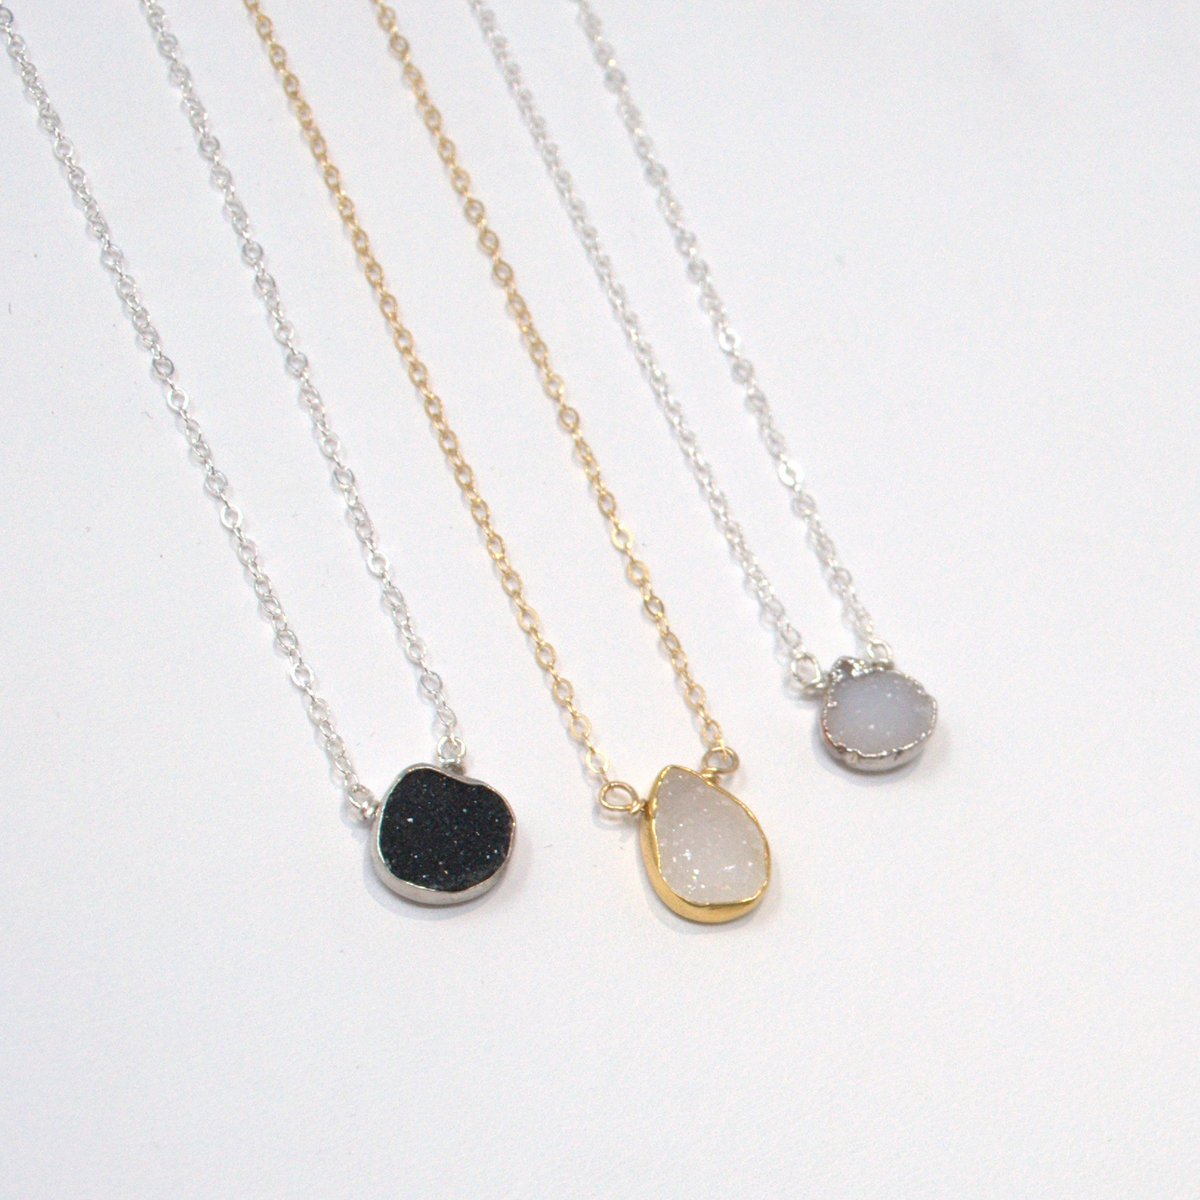 White Druzy & Sterling Silver Necklace